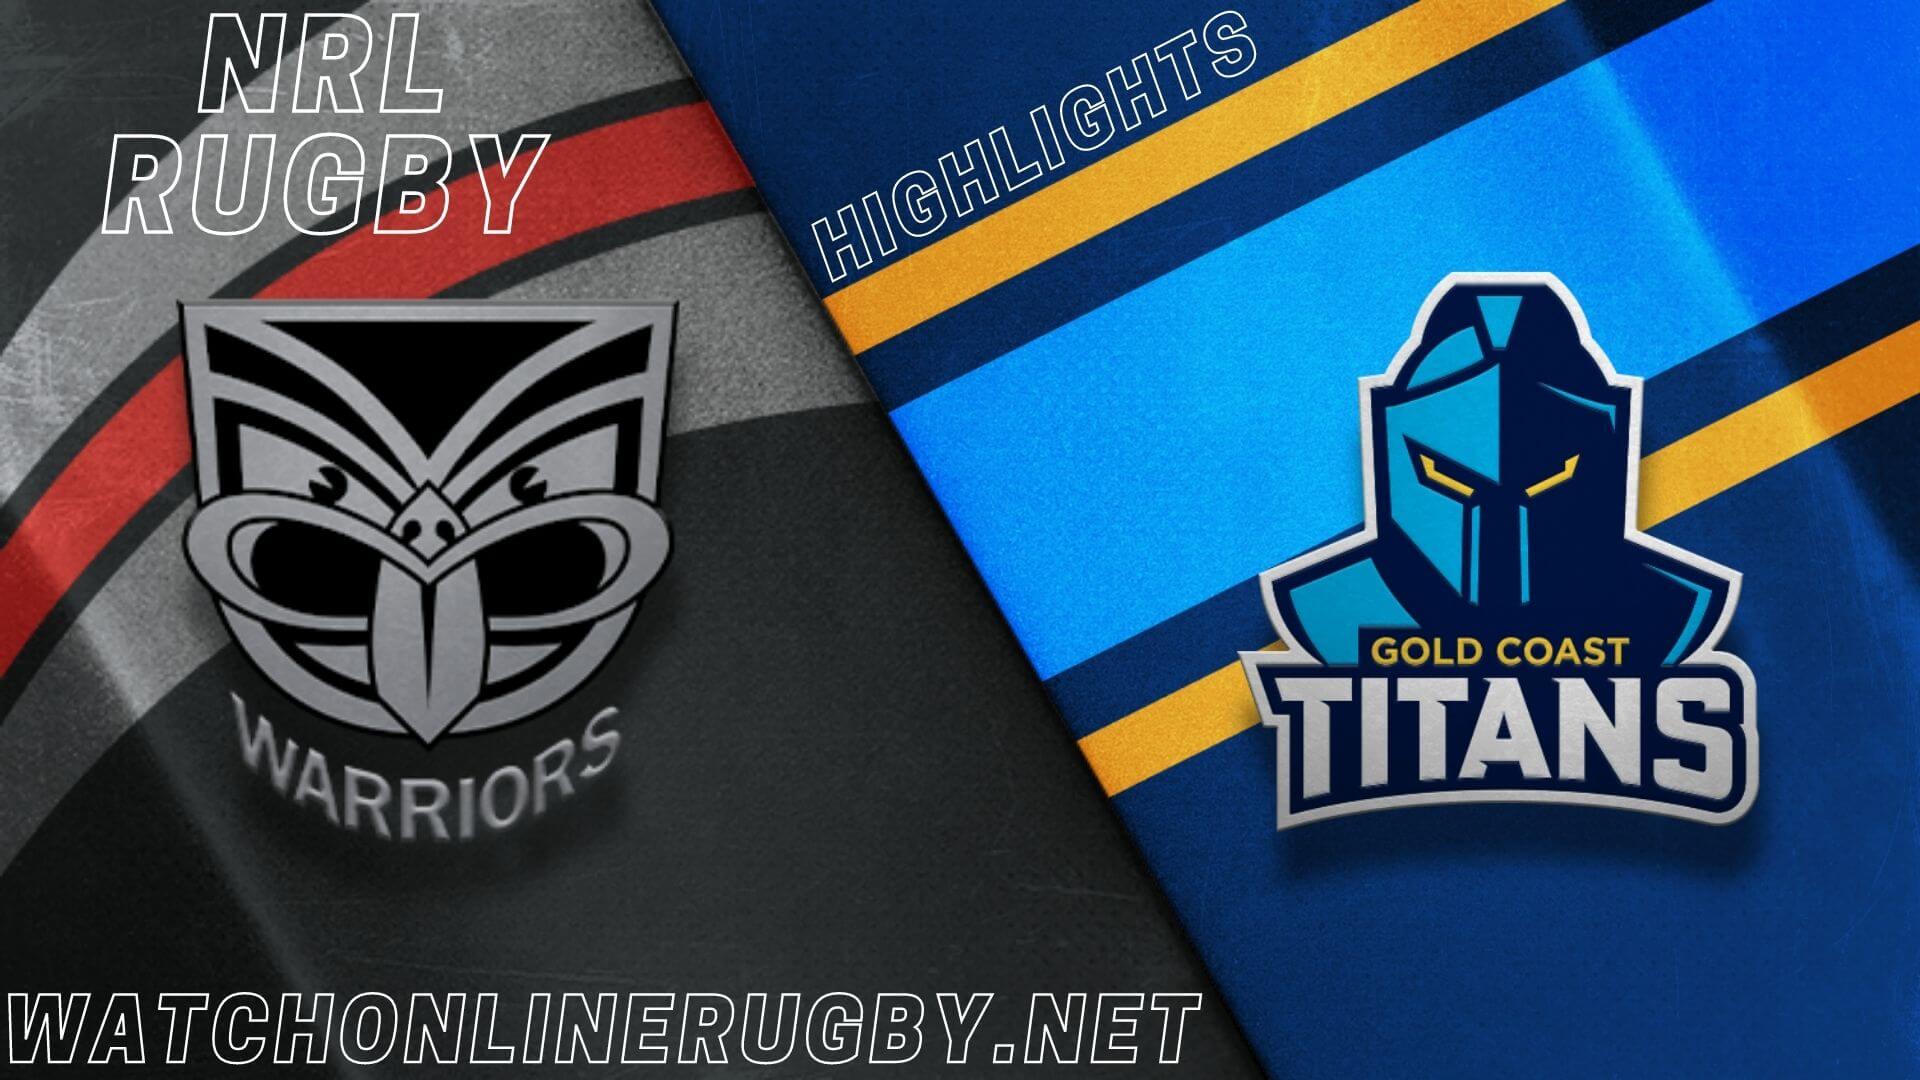 Warriors Vs Titans Highlights RD 25 NRL Rugby